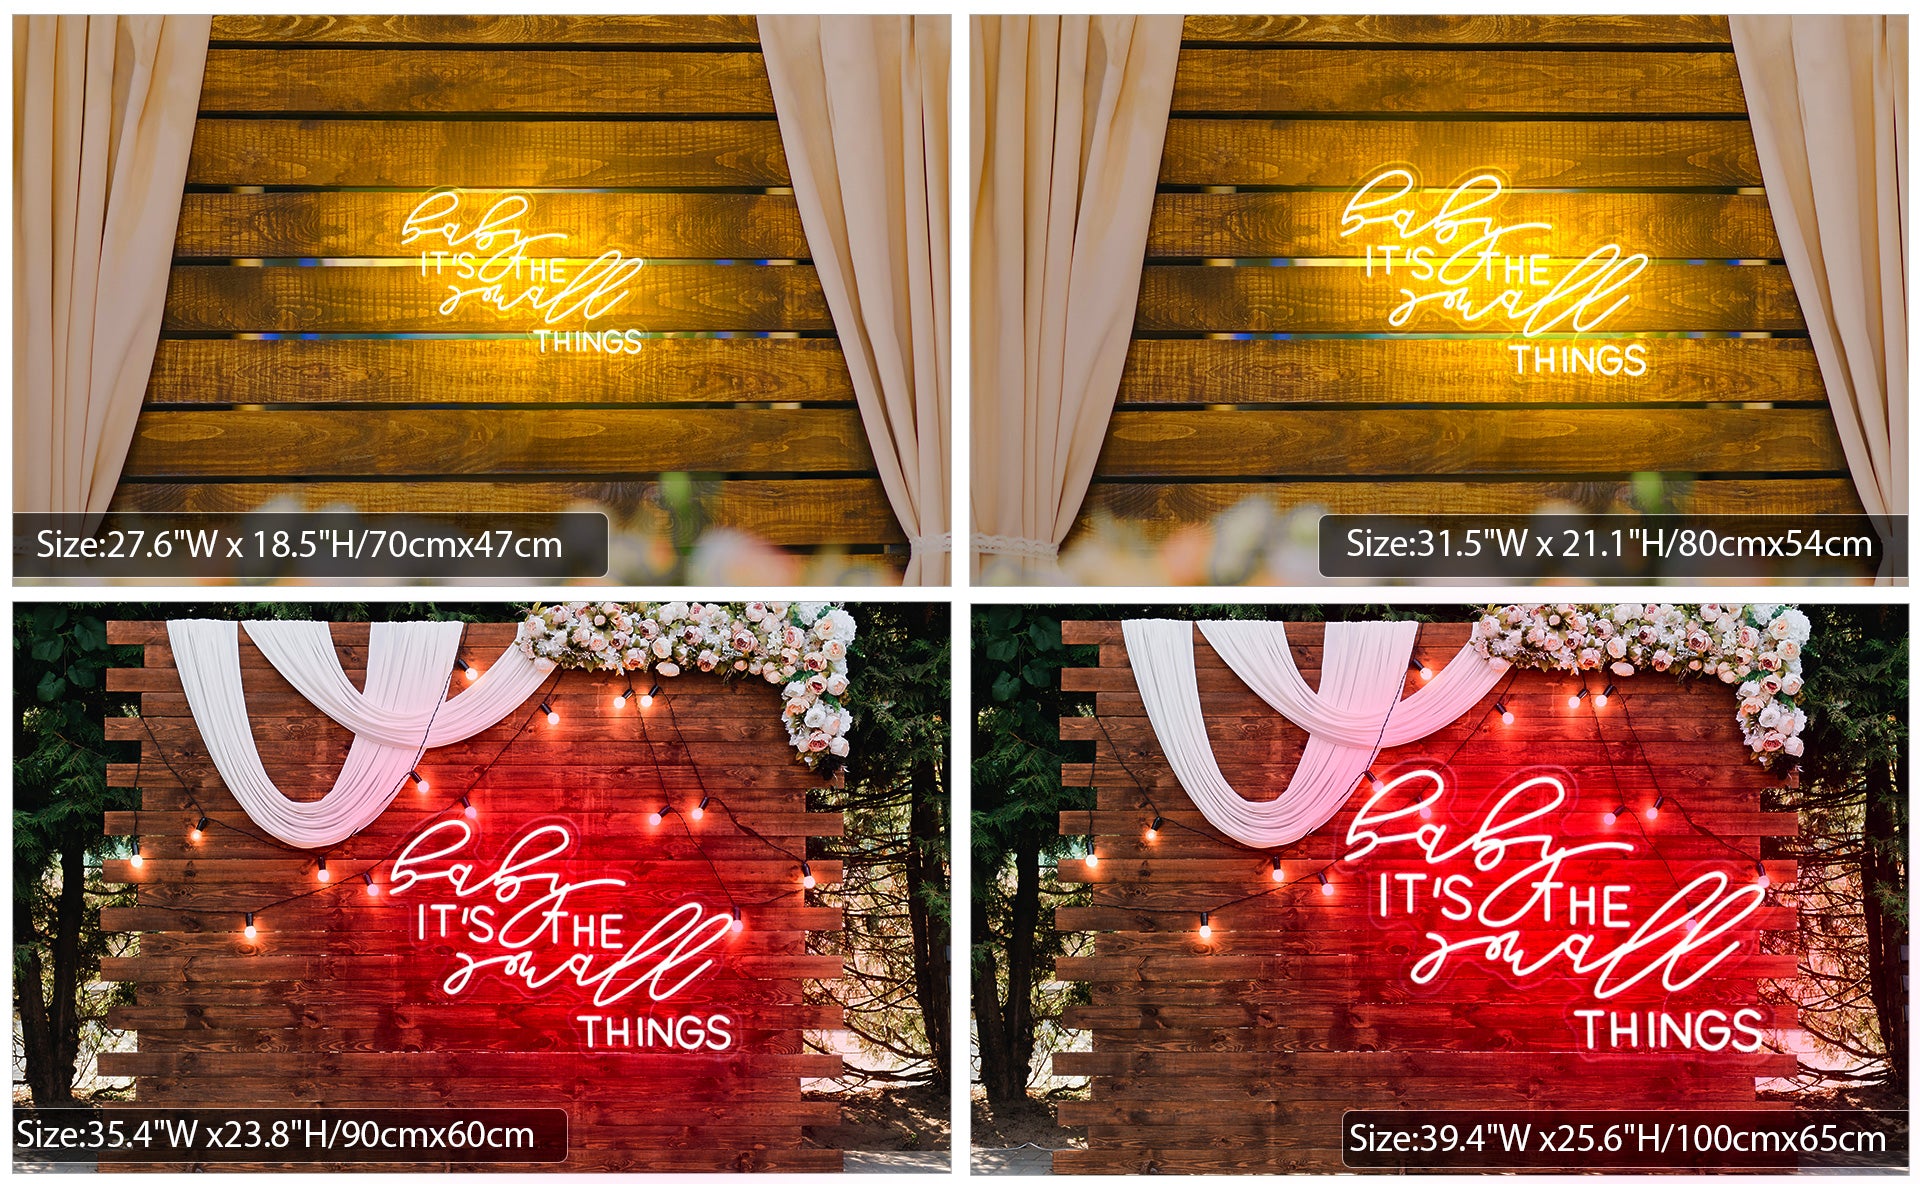 'Baby it's the small things' personalized neon light size